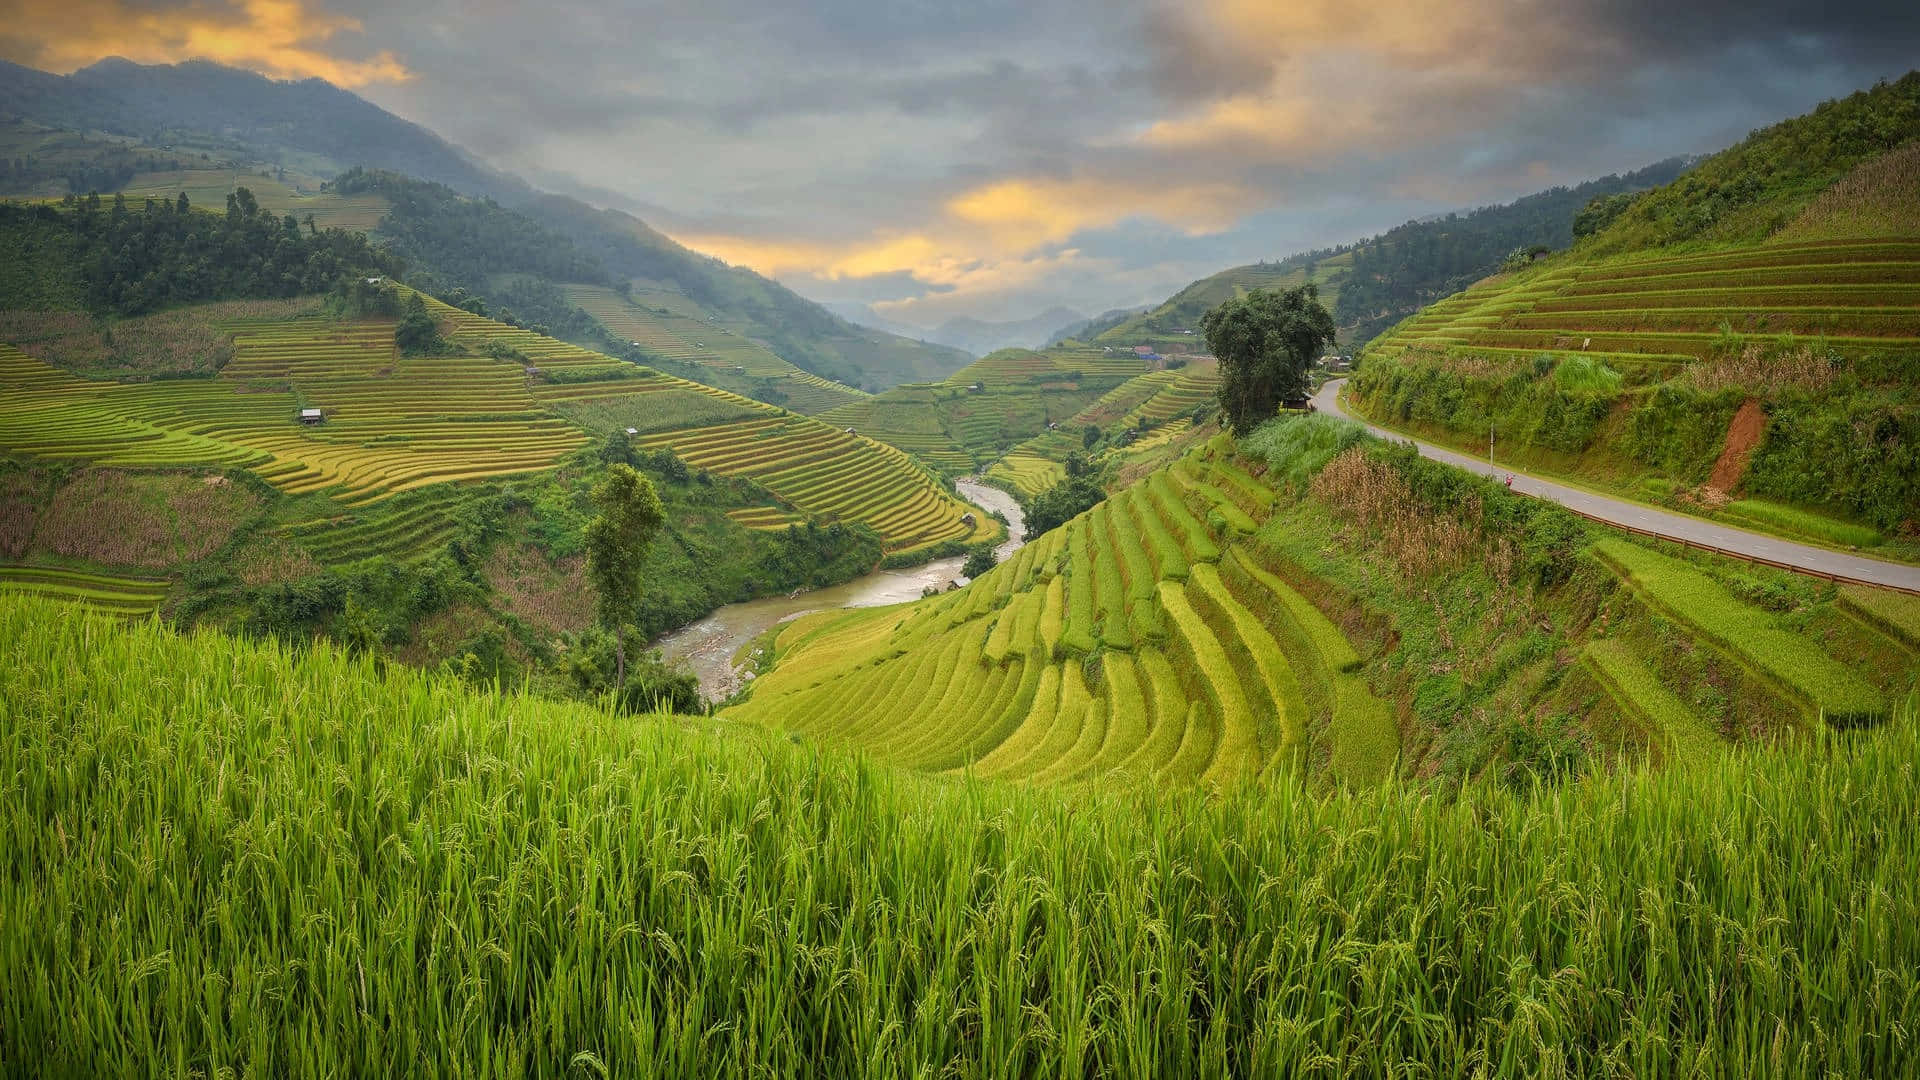 Majestic View of Banaue Rice Terraces, Philippines Wallpaper